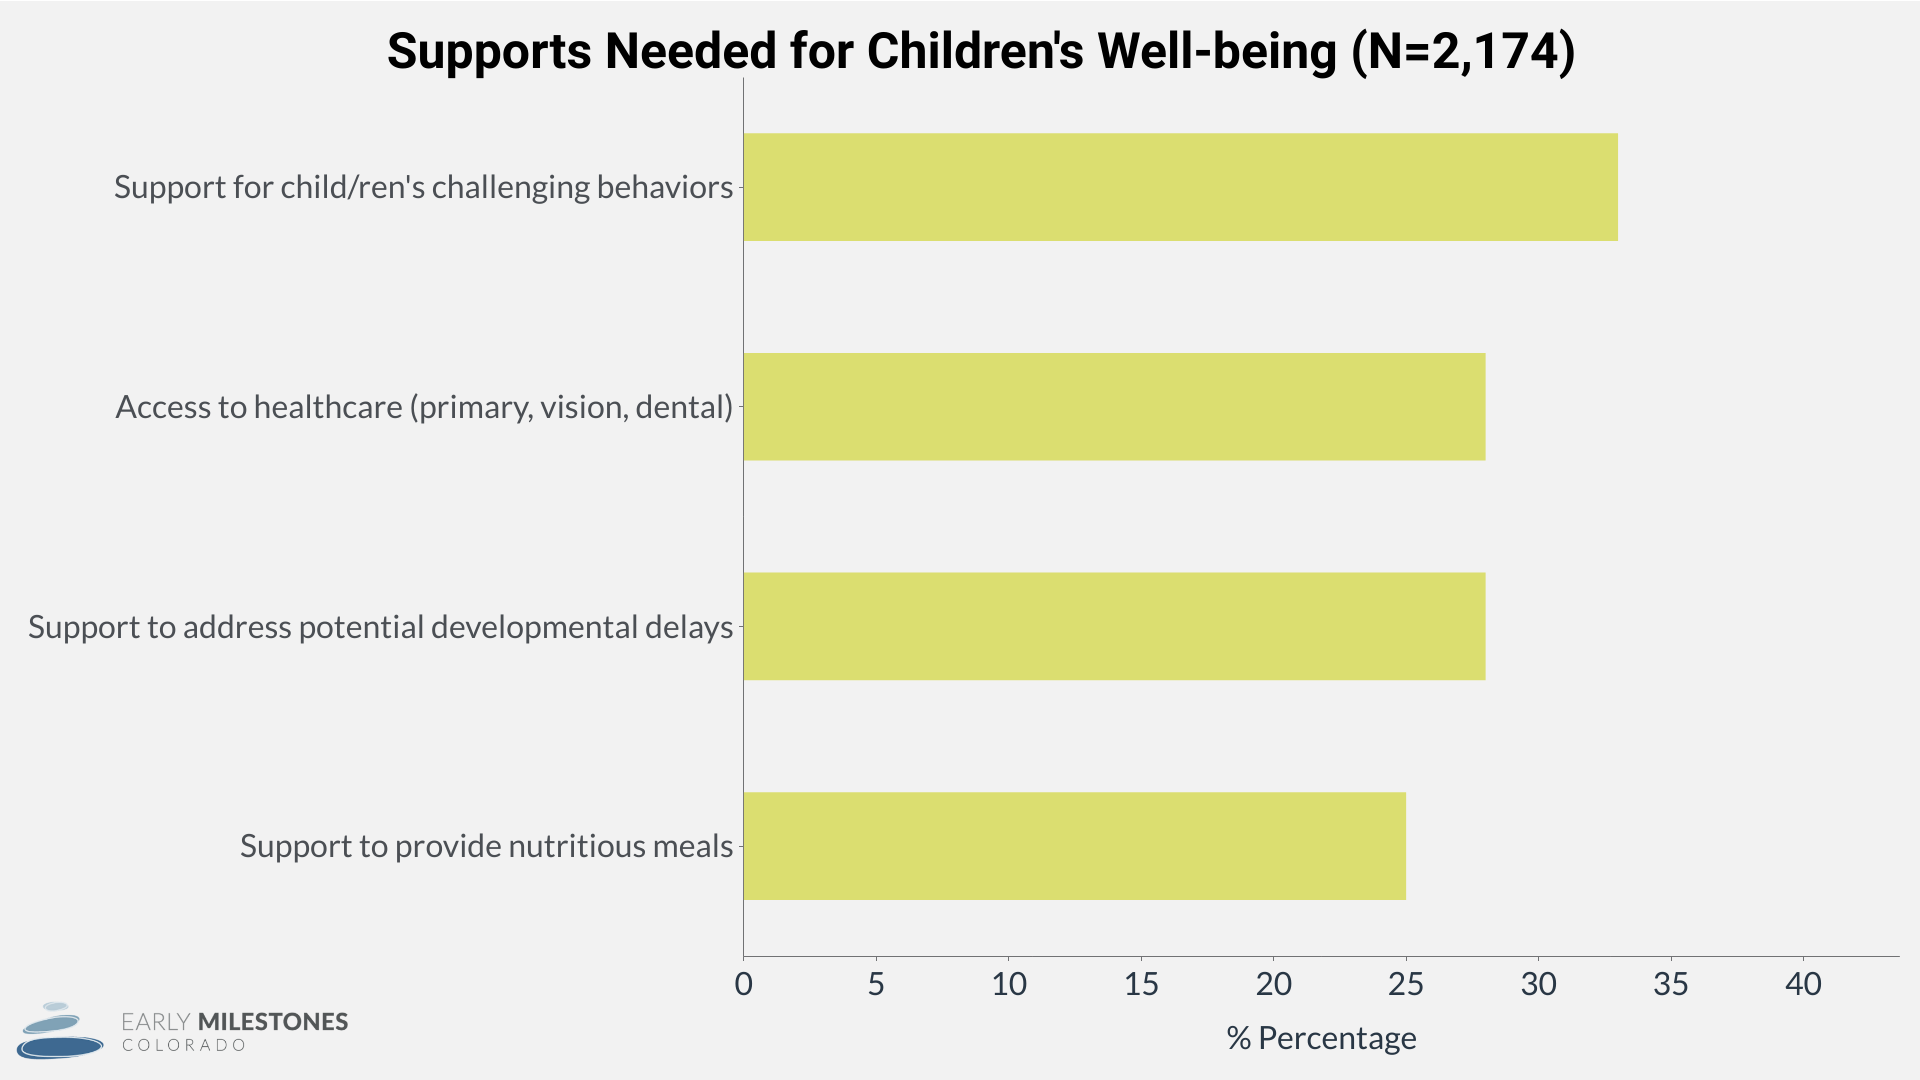 Bar chart showing percentage of families who need support for children's challenging behaviors; access to healthcare; to address potential developmental delays; to provide nutritious meals; and other. Described under the heading Supports Needed for Children's Well-being.